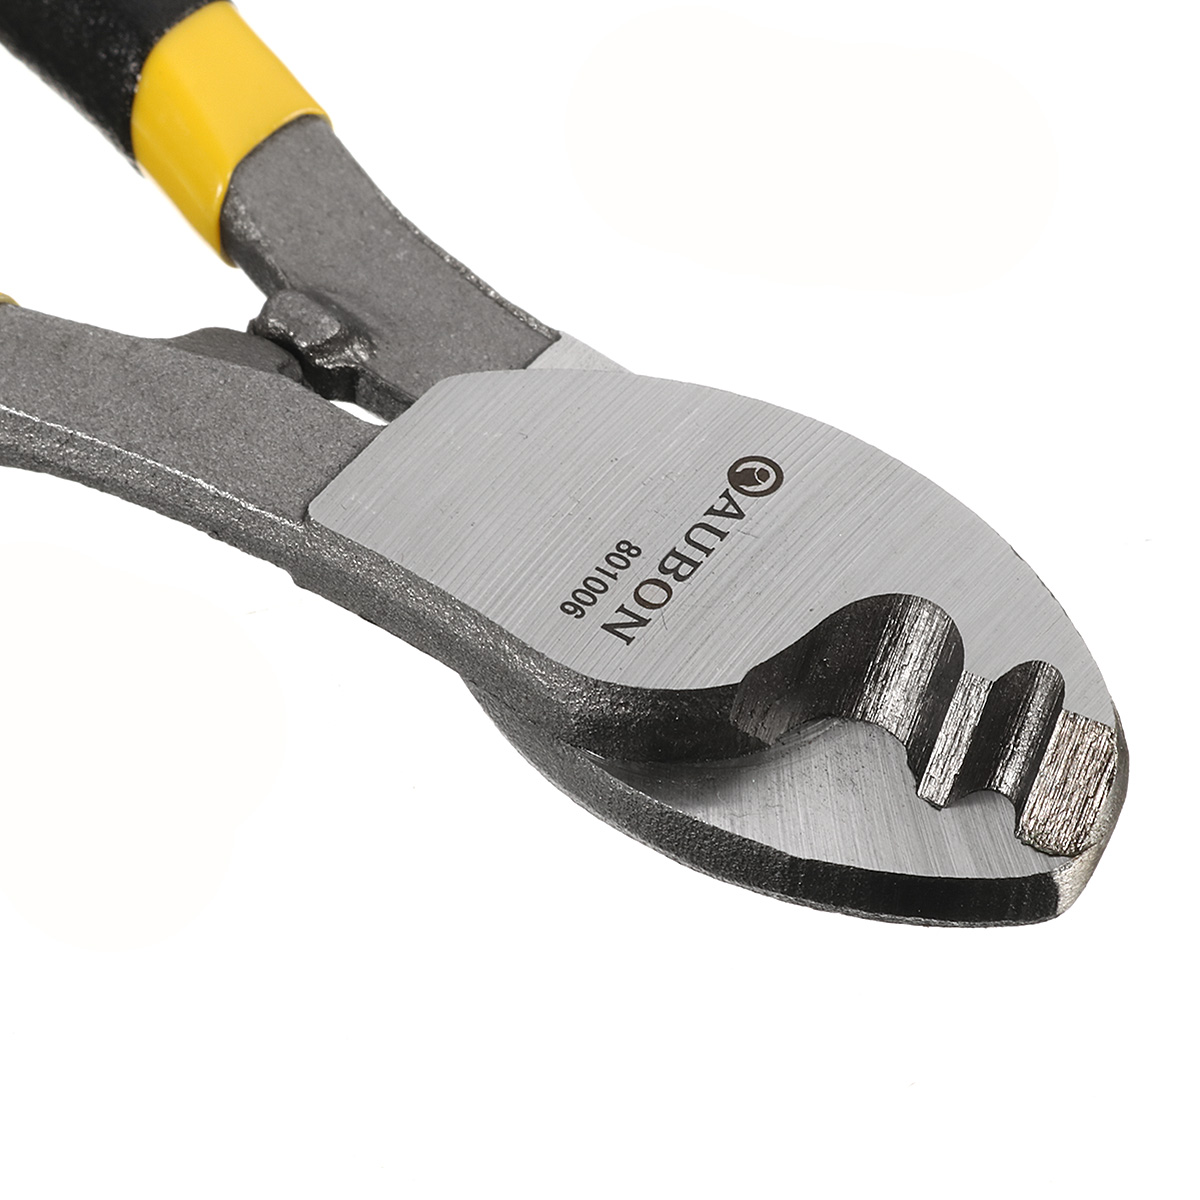 Heavy-Duty-Carbon-Steel-6inch8inch10inch-Cable-Wire-Cutter-Strippers-Cutters-Tool-1154501-2